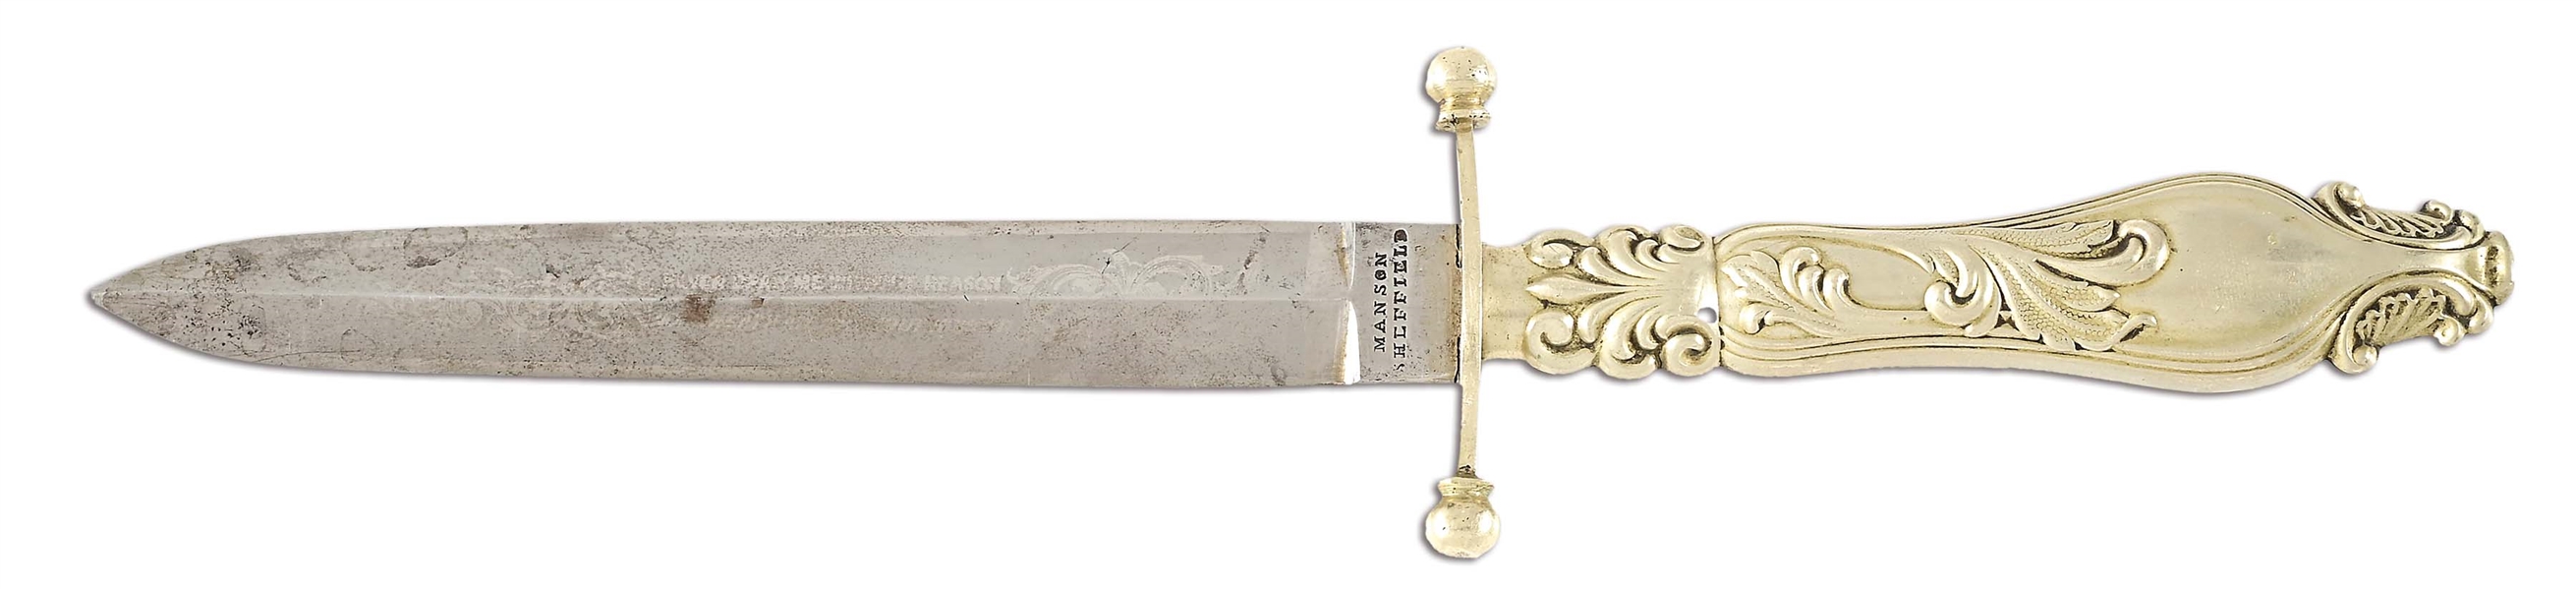 ETCHED BLADE DIRK KNIFE BY MANSON, SHEFFIELD.